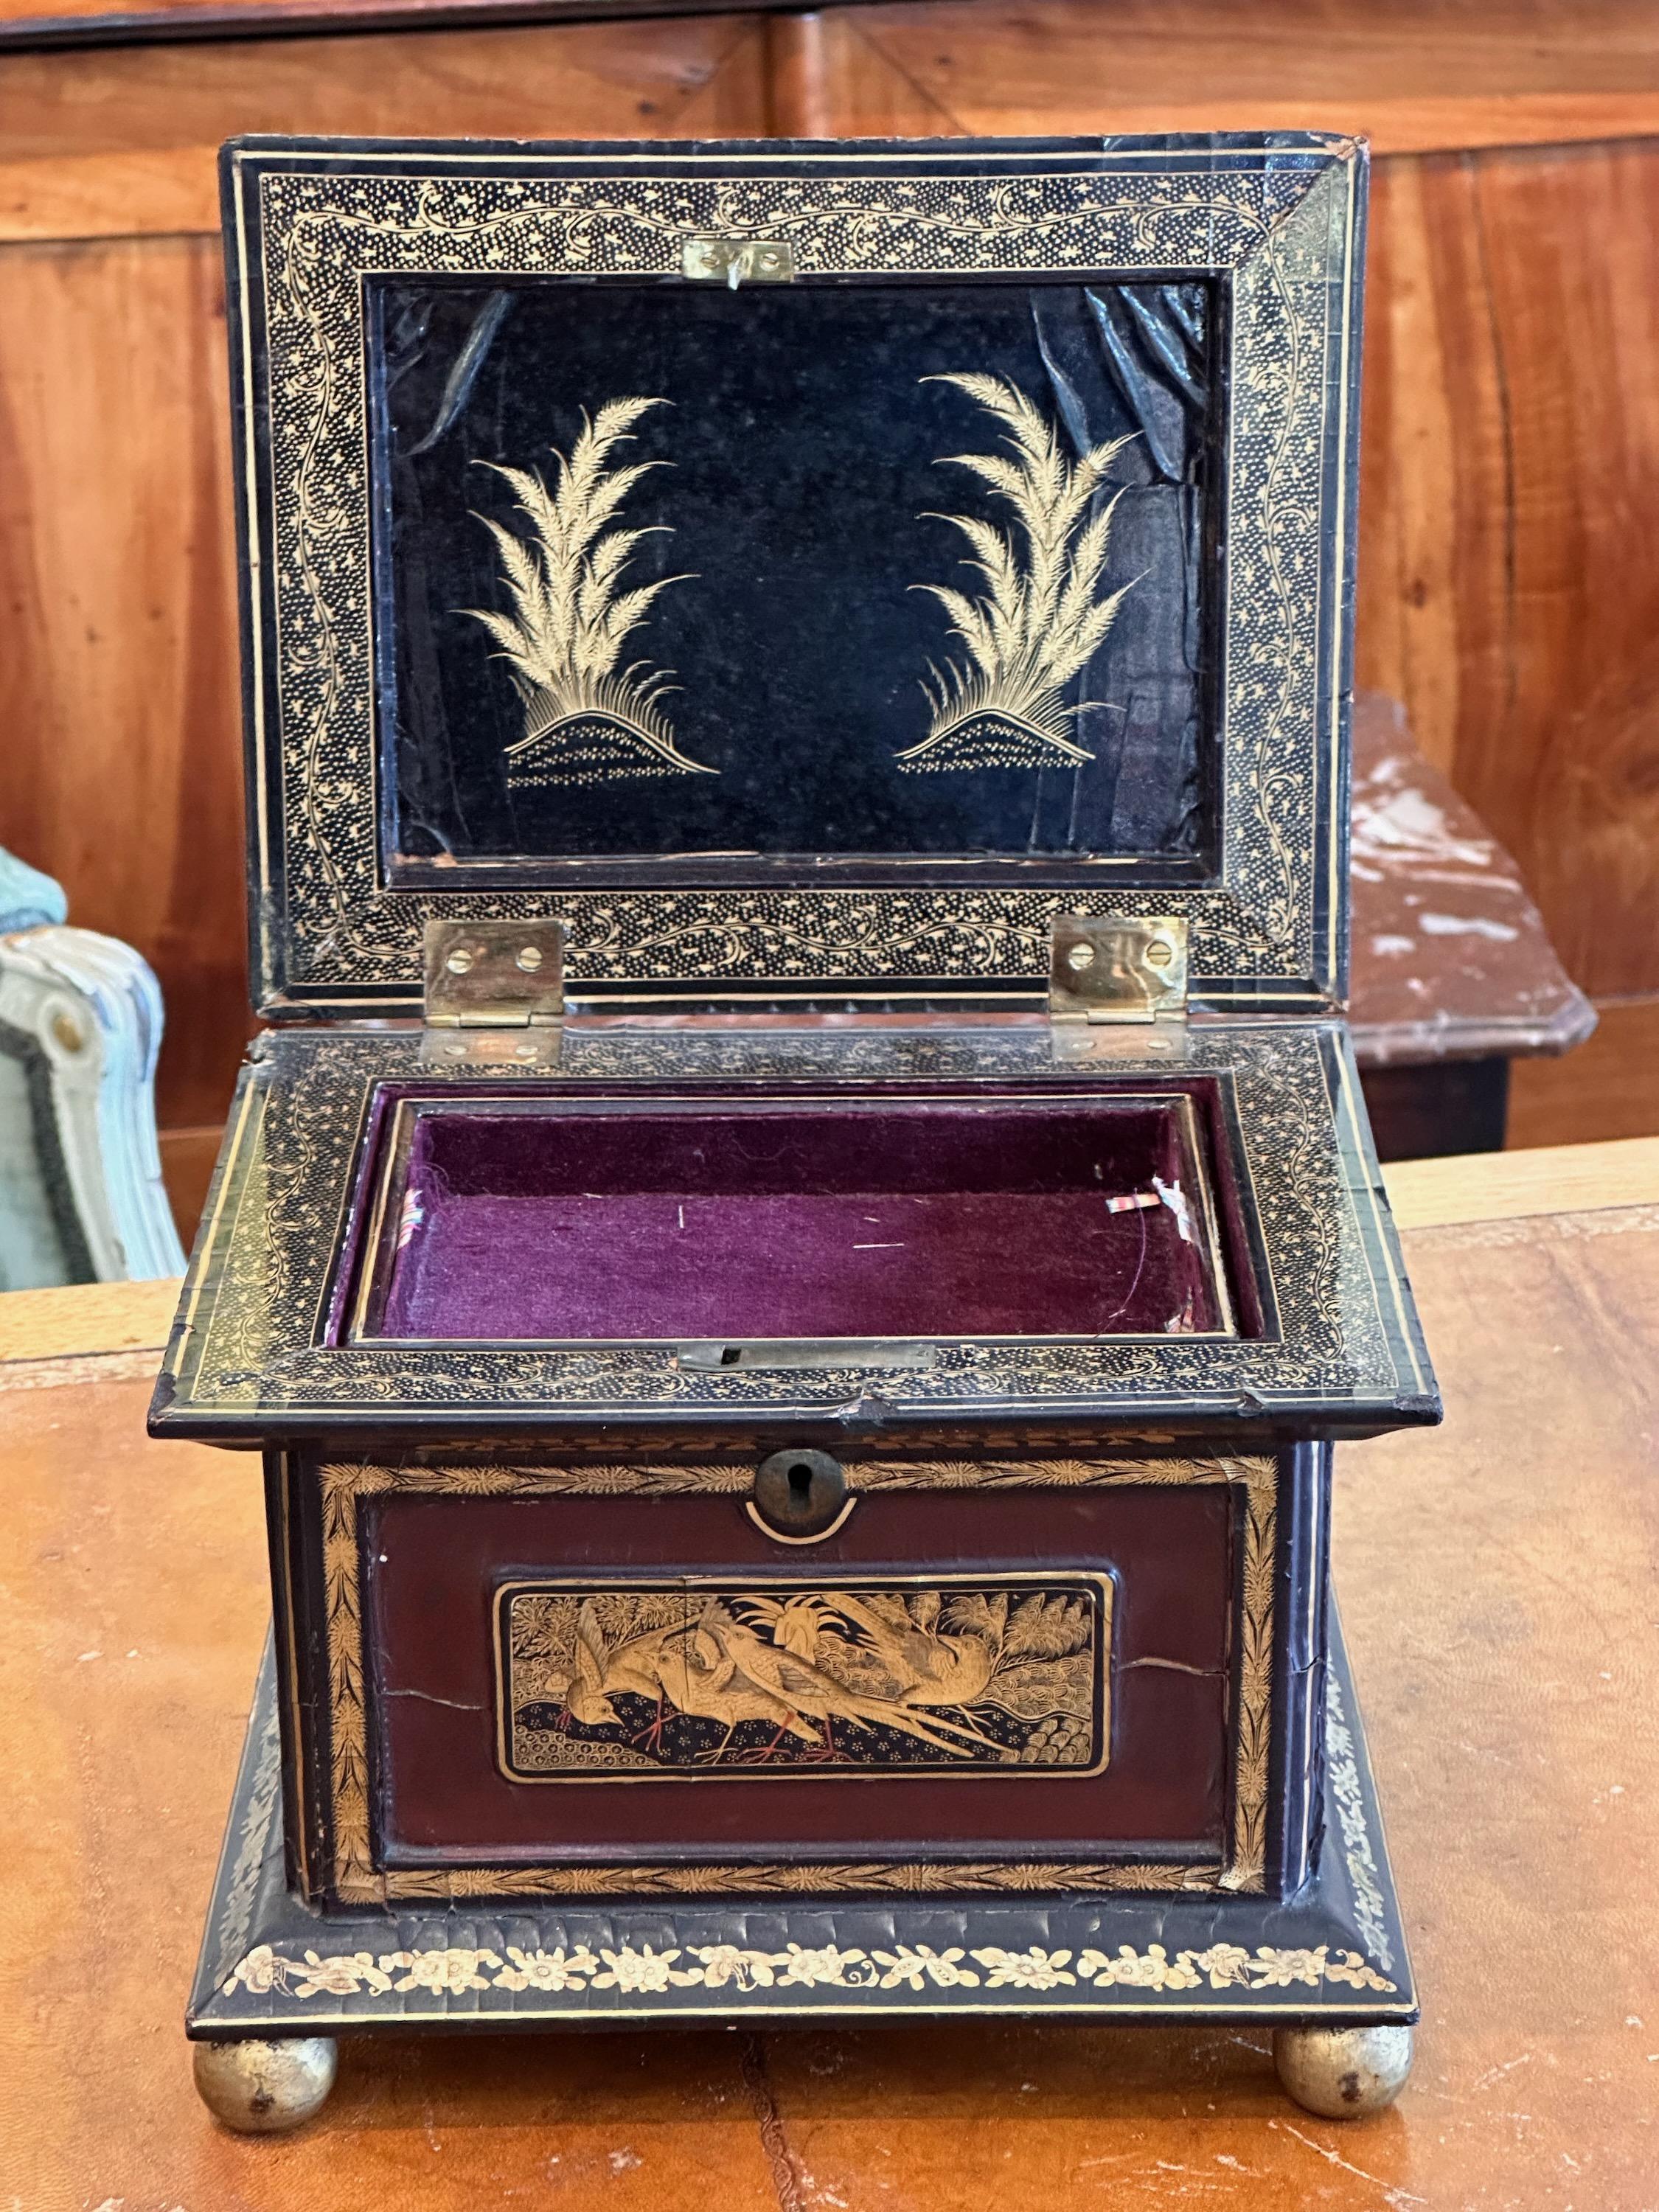 A lacquered box with Asian decorations. Great for the collector